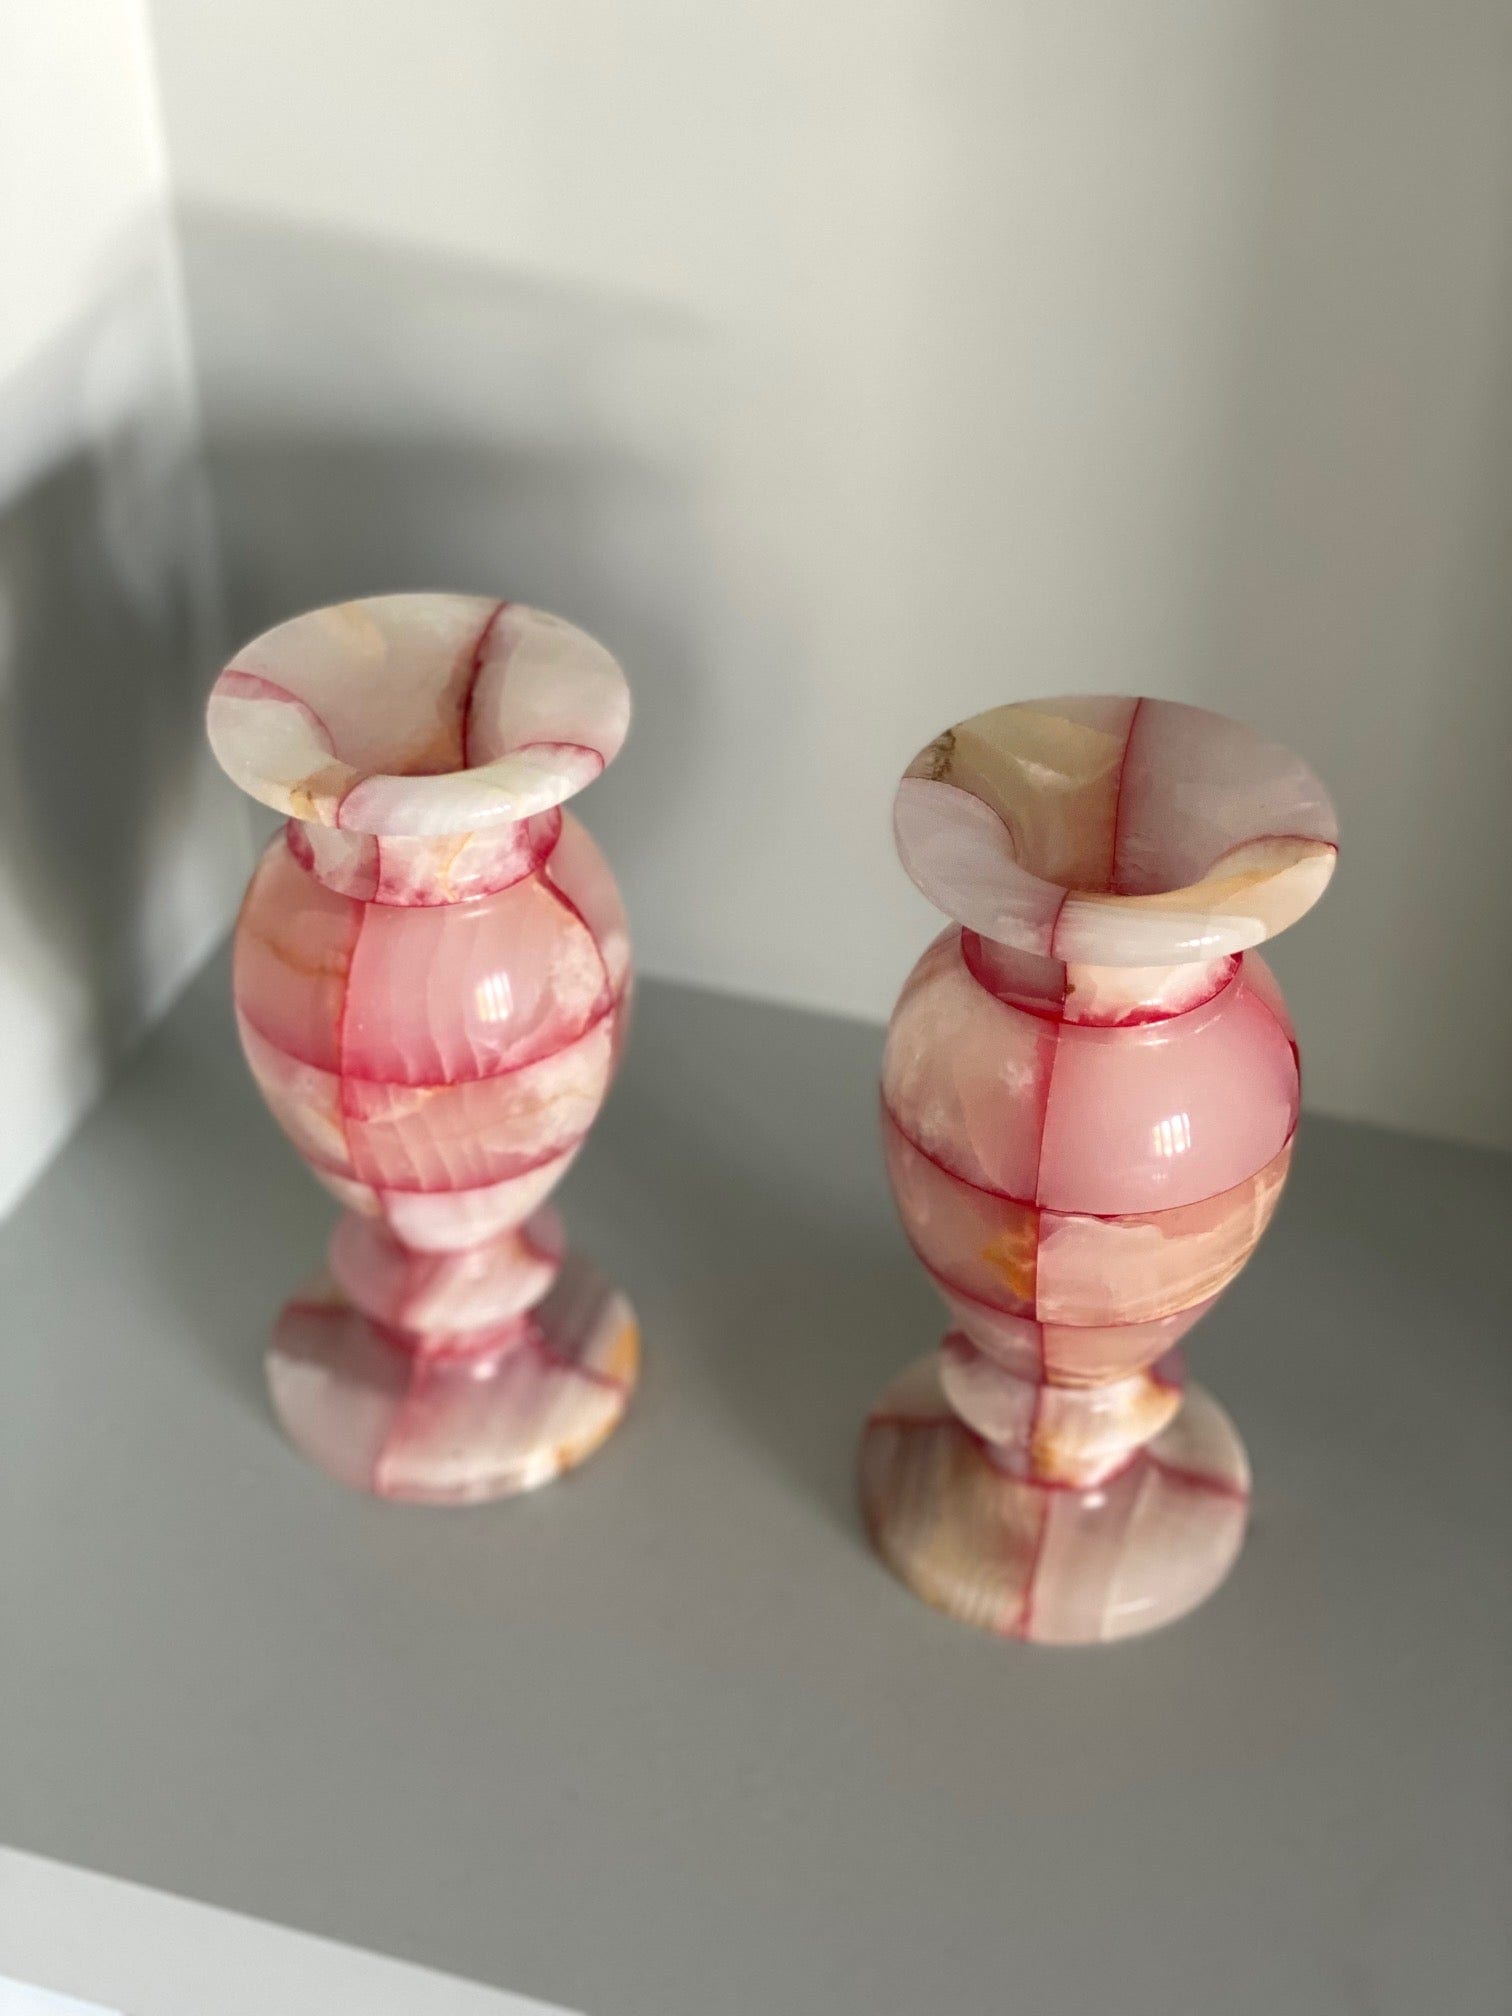 KEPT London A pair of pink and white onyx vases